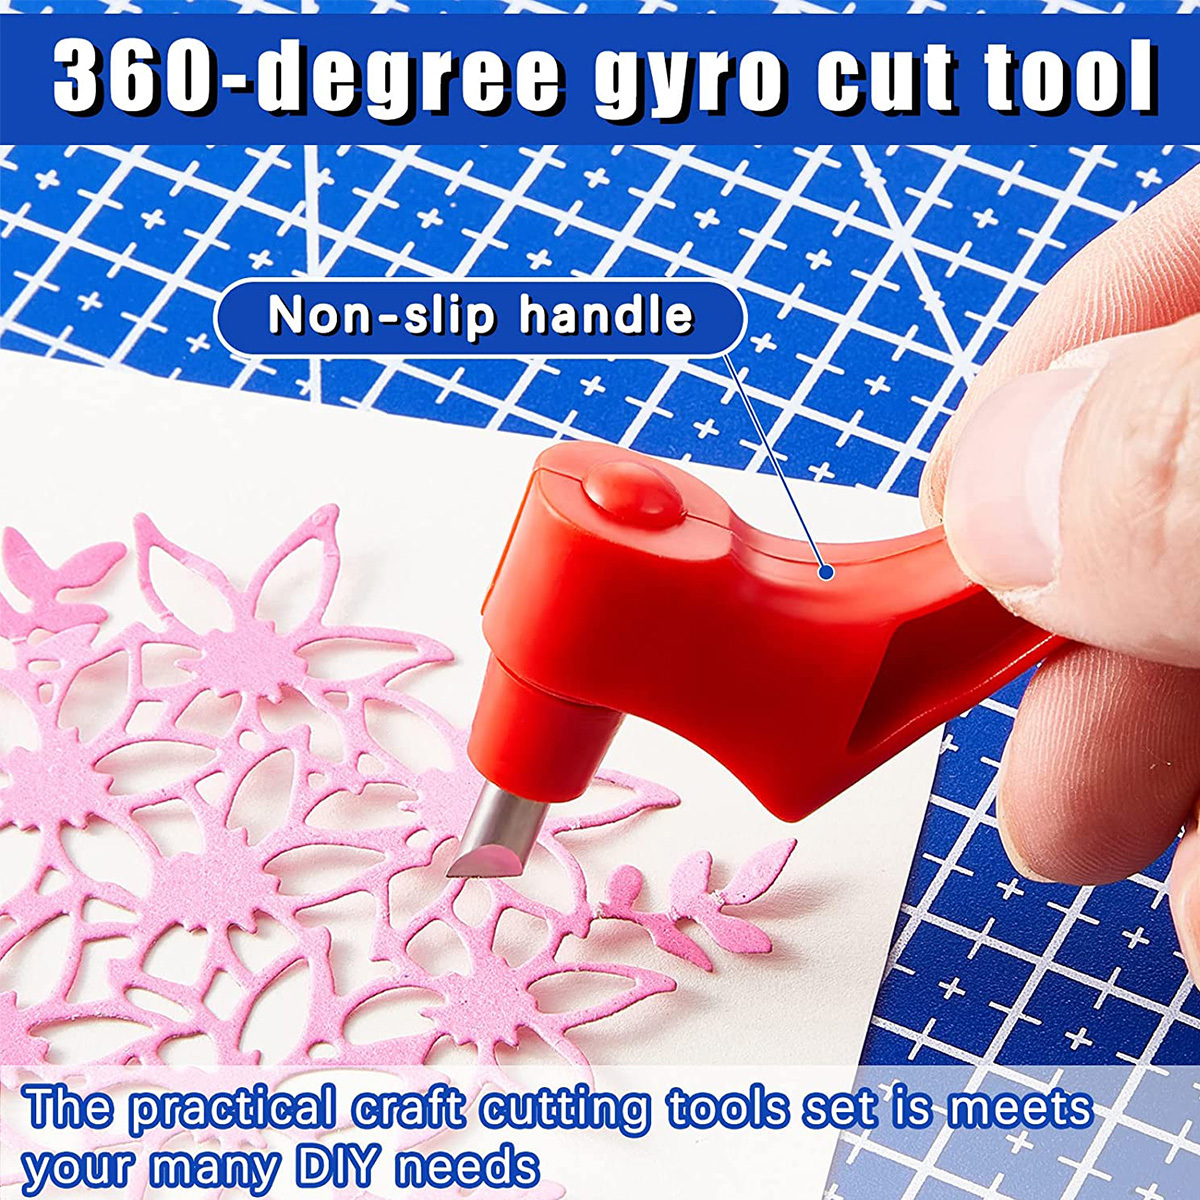 Gyro Cut Craft Tools Stainless Steel Gyro Cutter 360-degree Paper Knife Gyro-cut  Pro Safety Cutter Art Cutting Tool